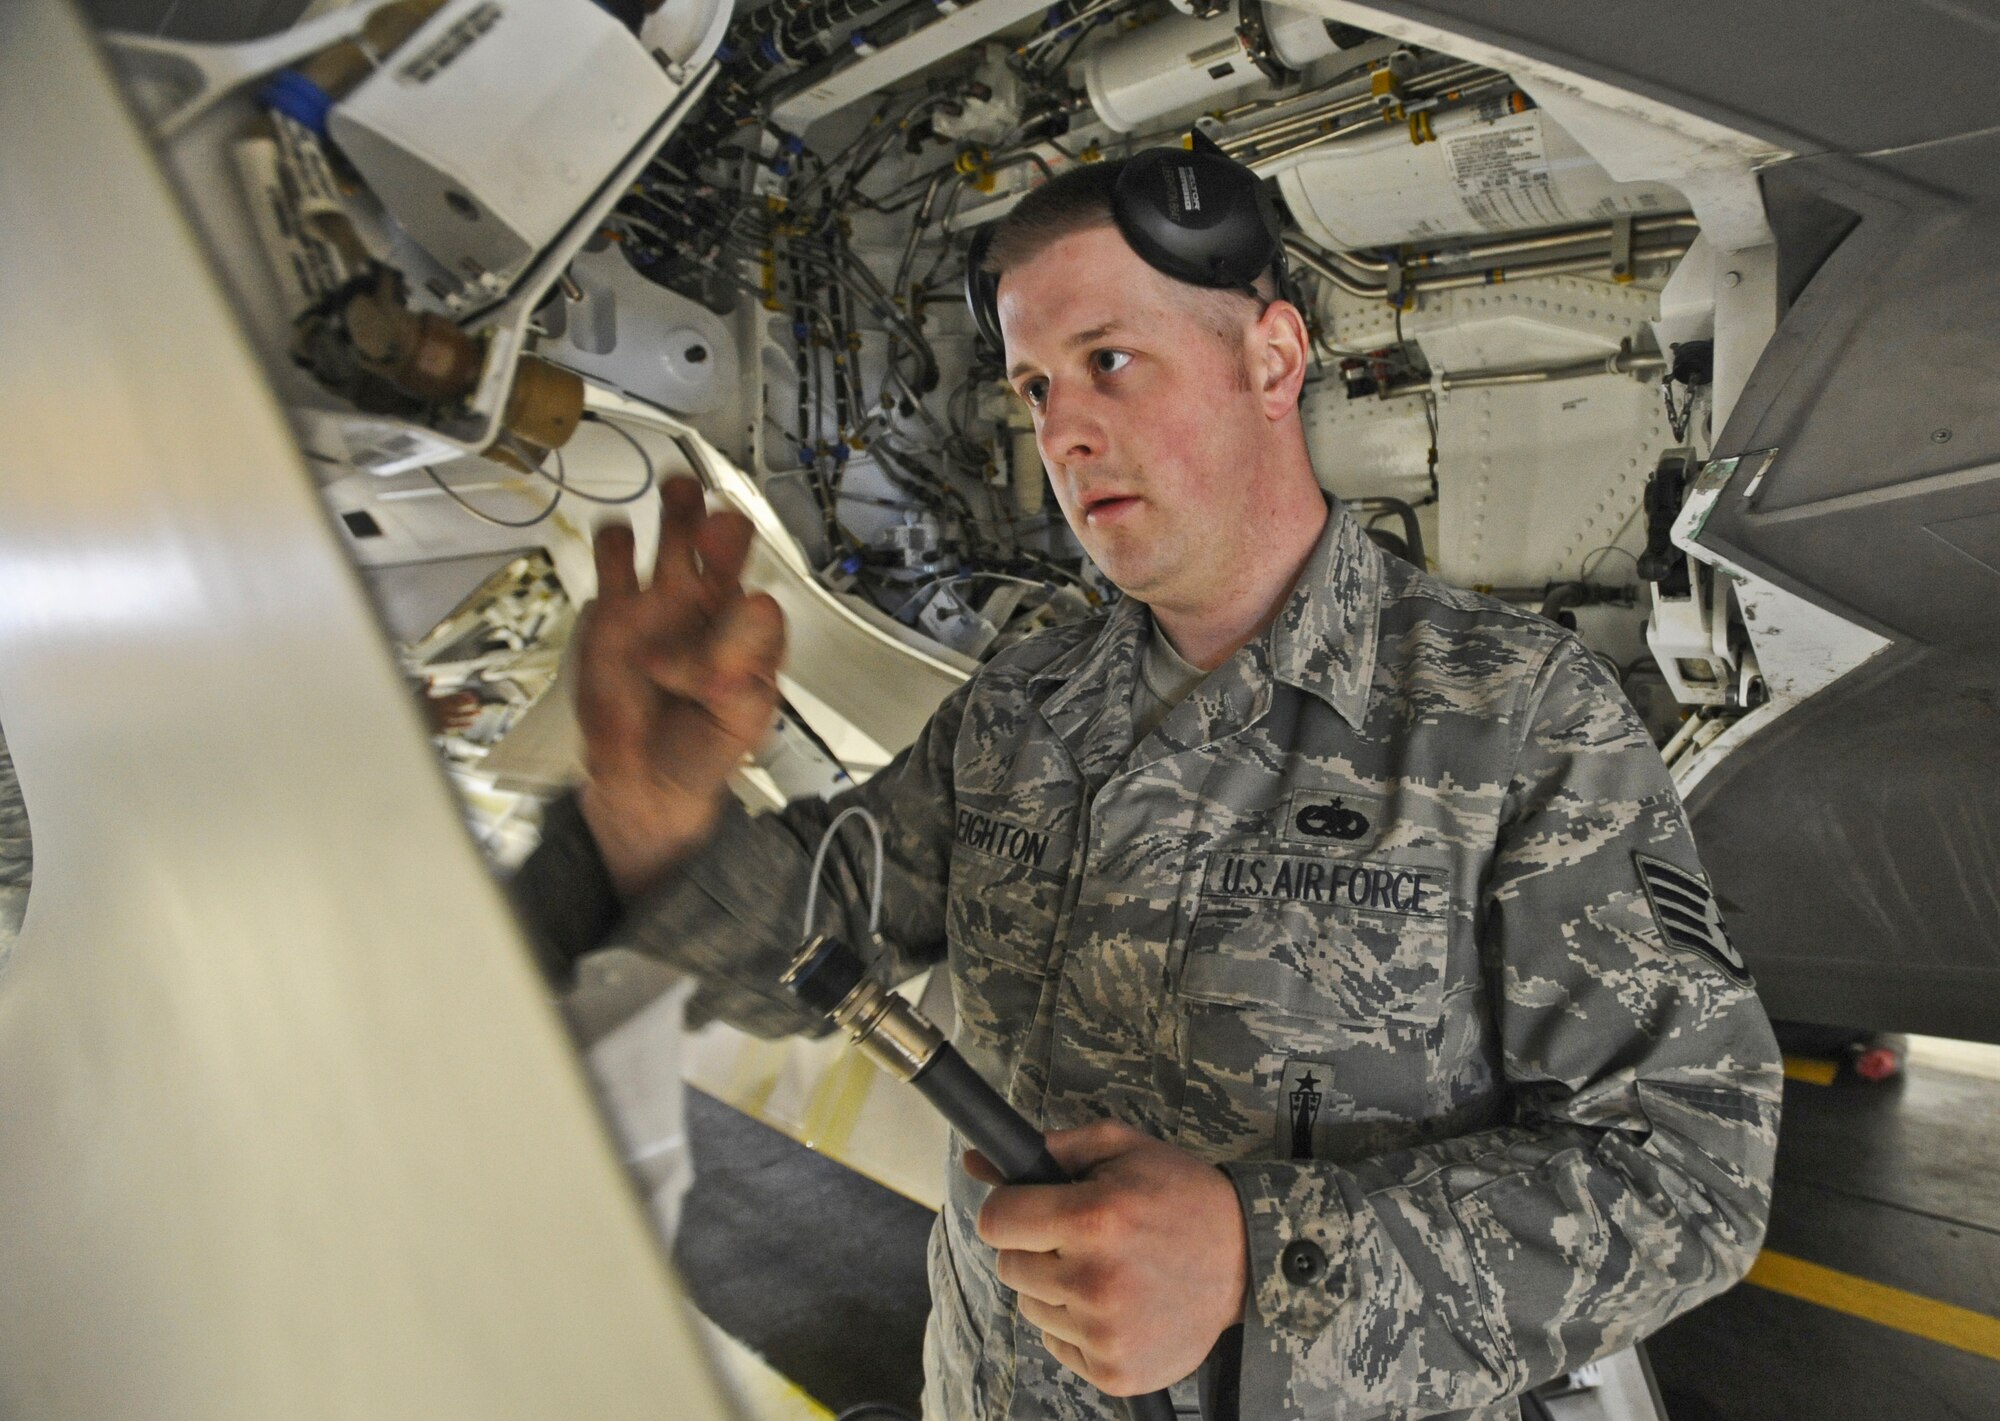 ELMENDORF AIR FORCE BASE, Alaska -- Staff Sgt. Jason Leighton, 90th Aircraft Maintenance Unit, examines the interior of a F-22 during a load crew inspection March 11, 2009. Leighton is a 2009 Lt. Gen. Leo Marquez Award winner in the Munitions/Missile Technician Supervisor Category. The Marquez Award is one of the hightest honors for a maintainer at Air Force level. (U.S. Air Force photo/Senior Airman Matthew Owens)